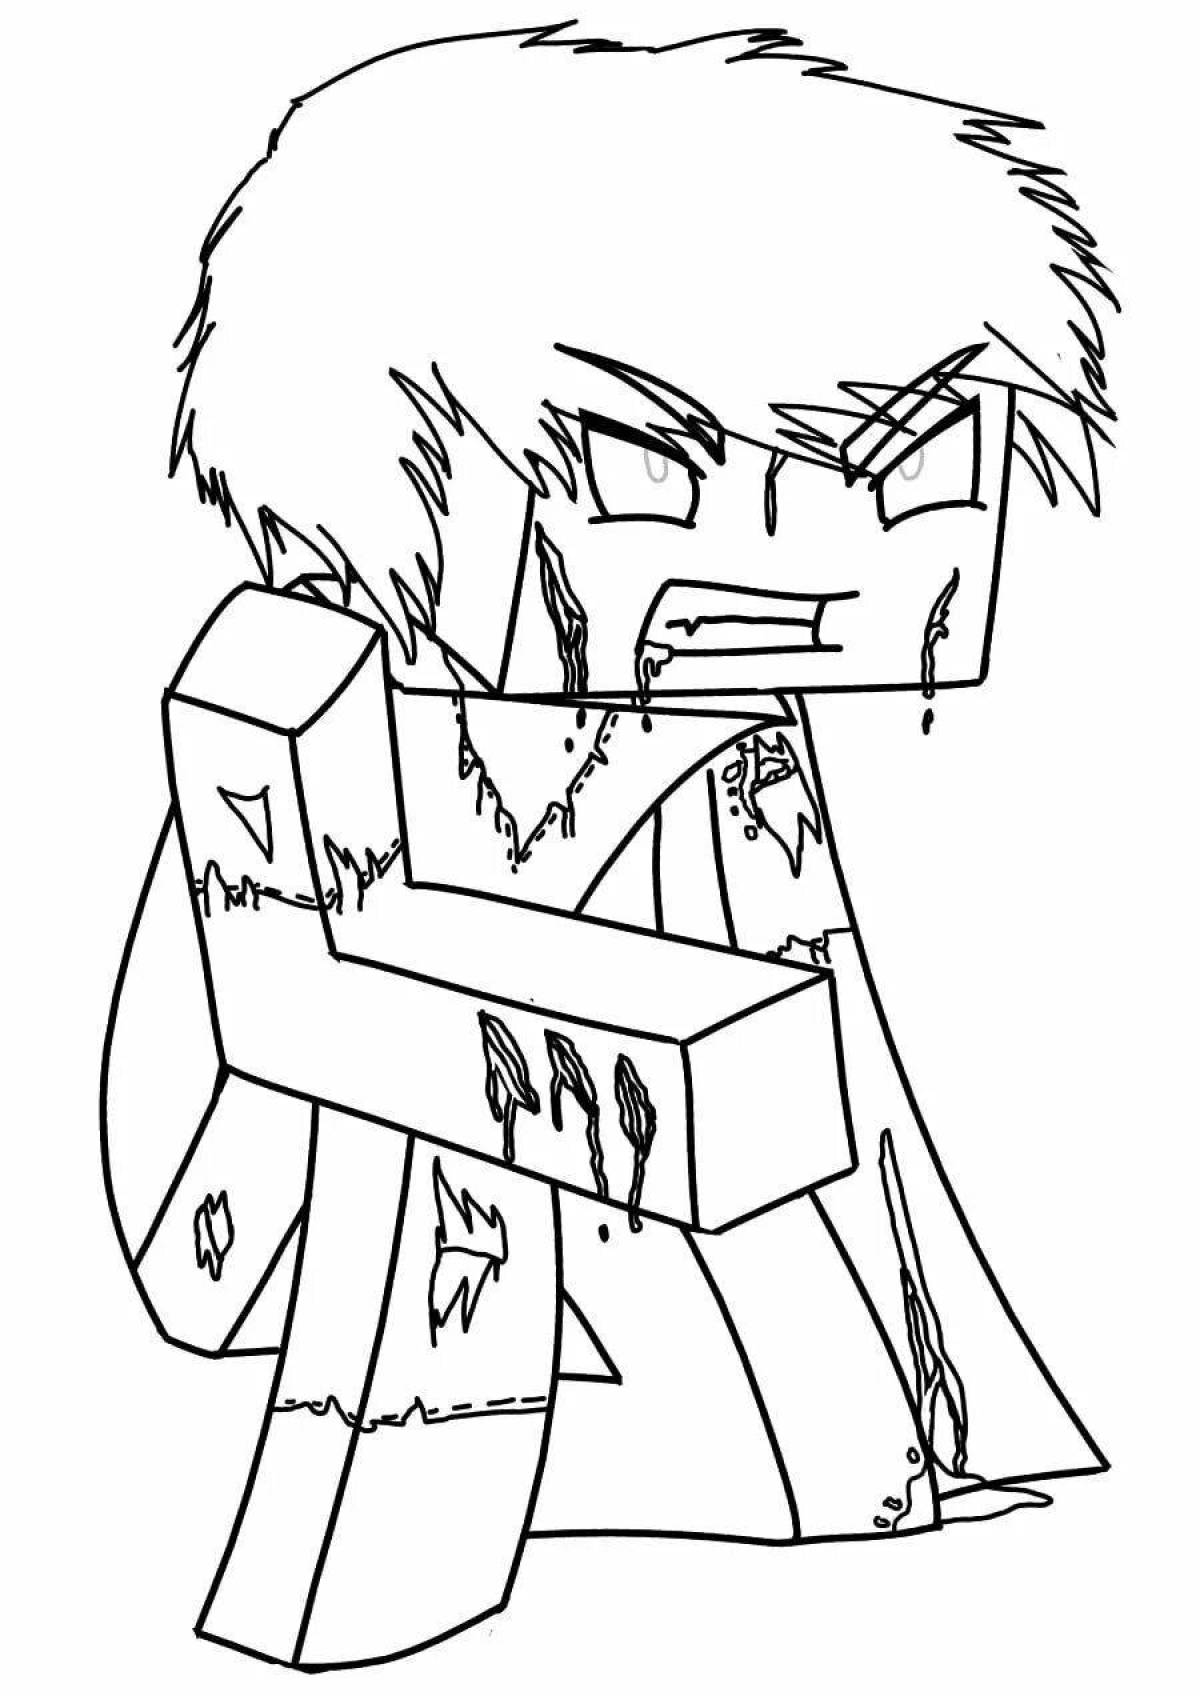 Playful minecraft skeleton coloring page